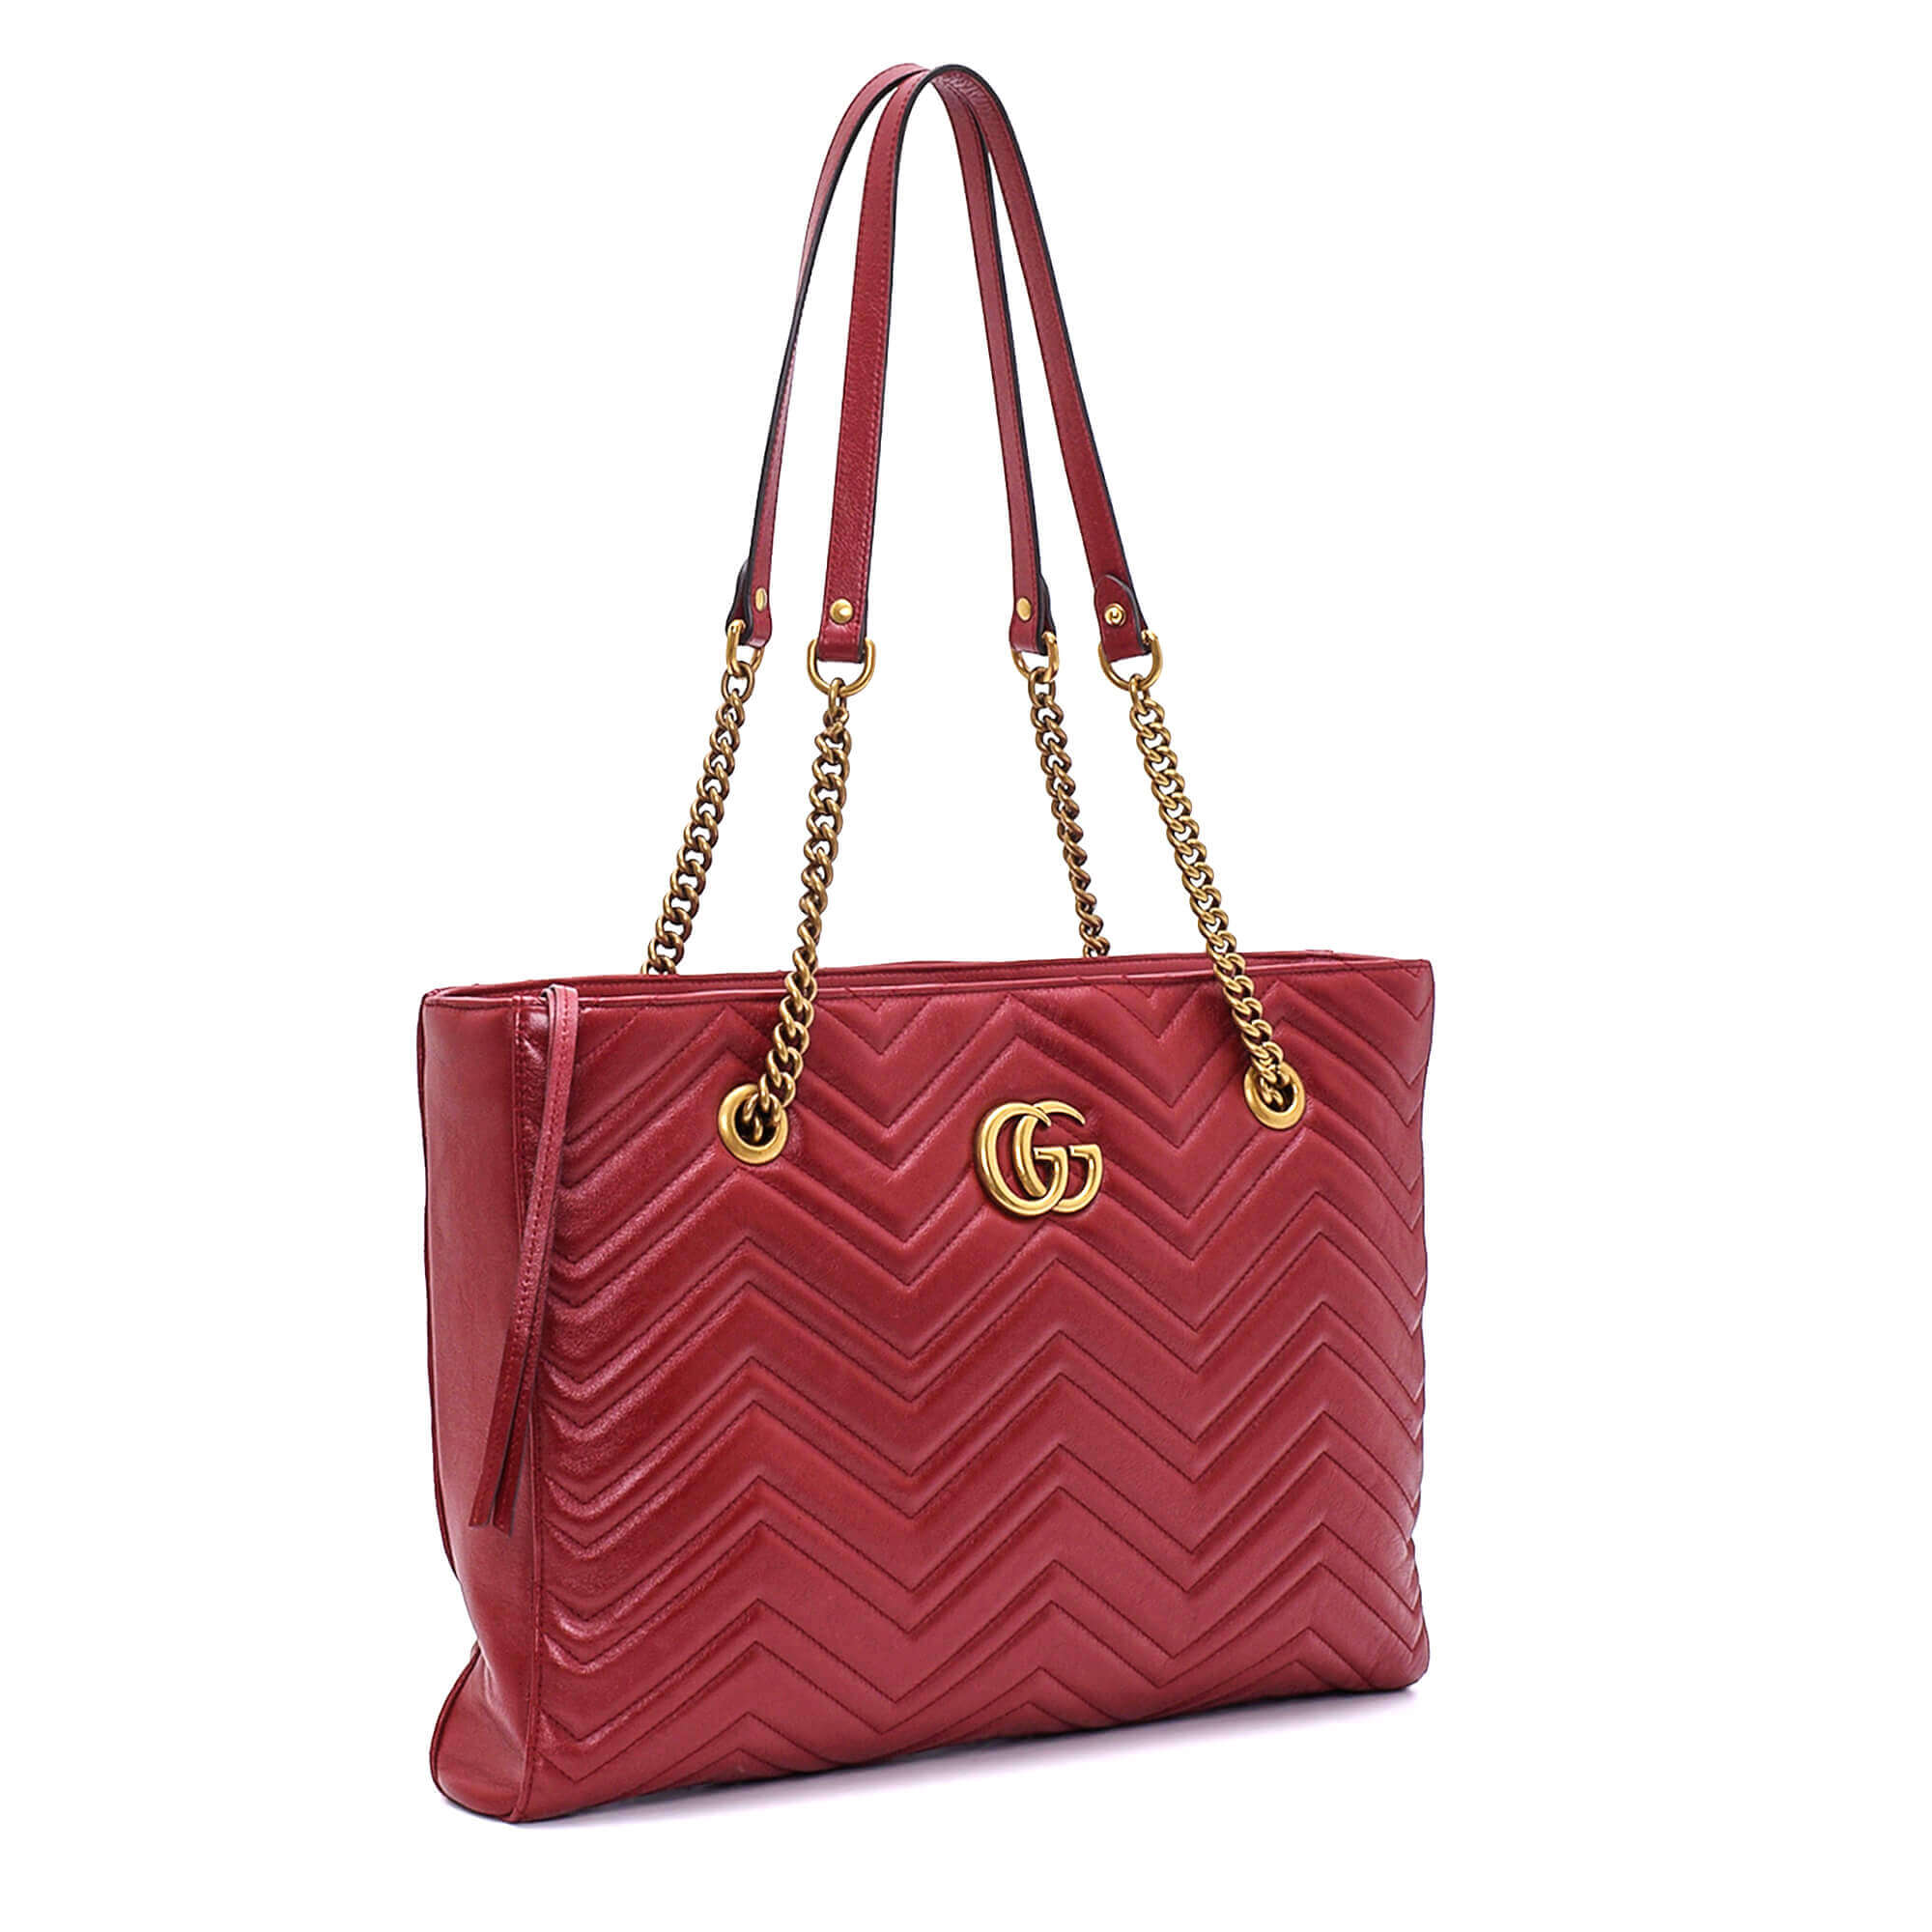 Gucci - Red Matelasse Leather GG Logo Tote Bag